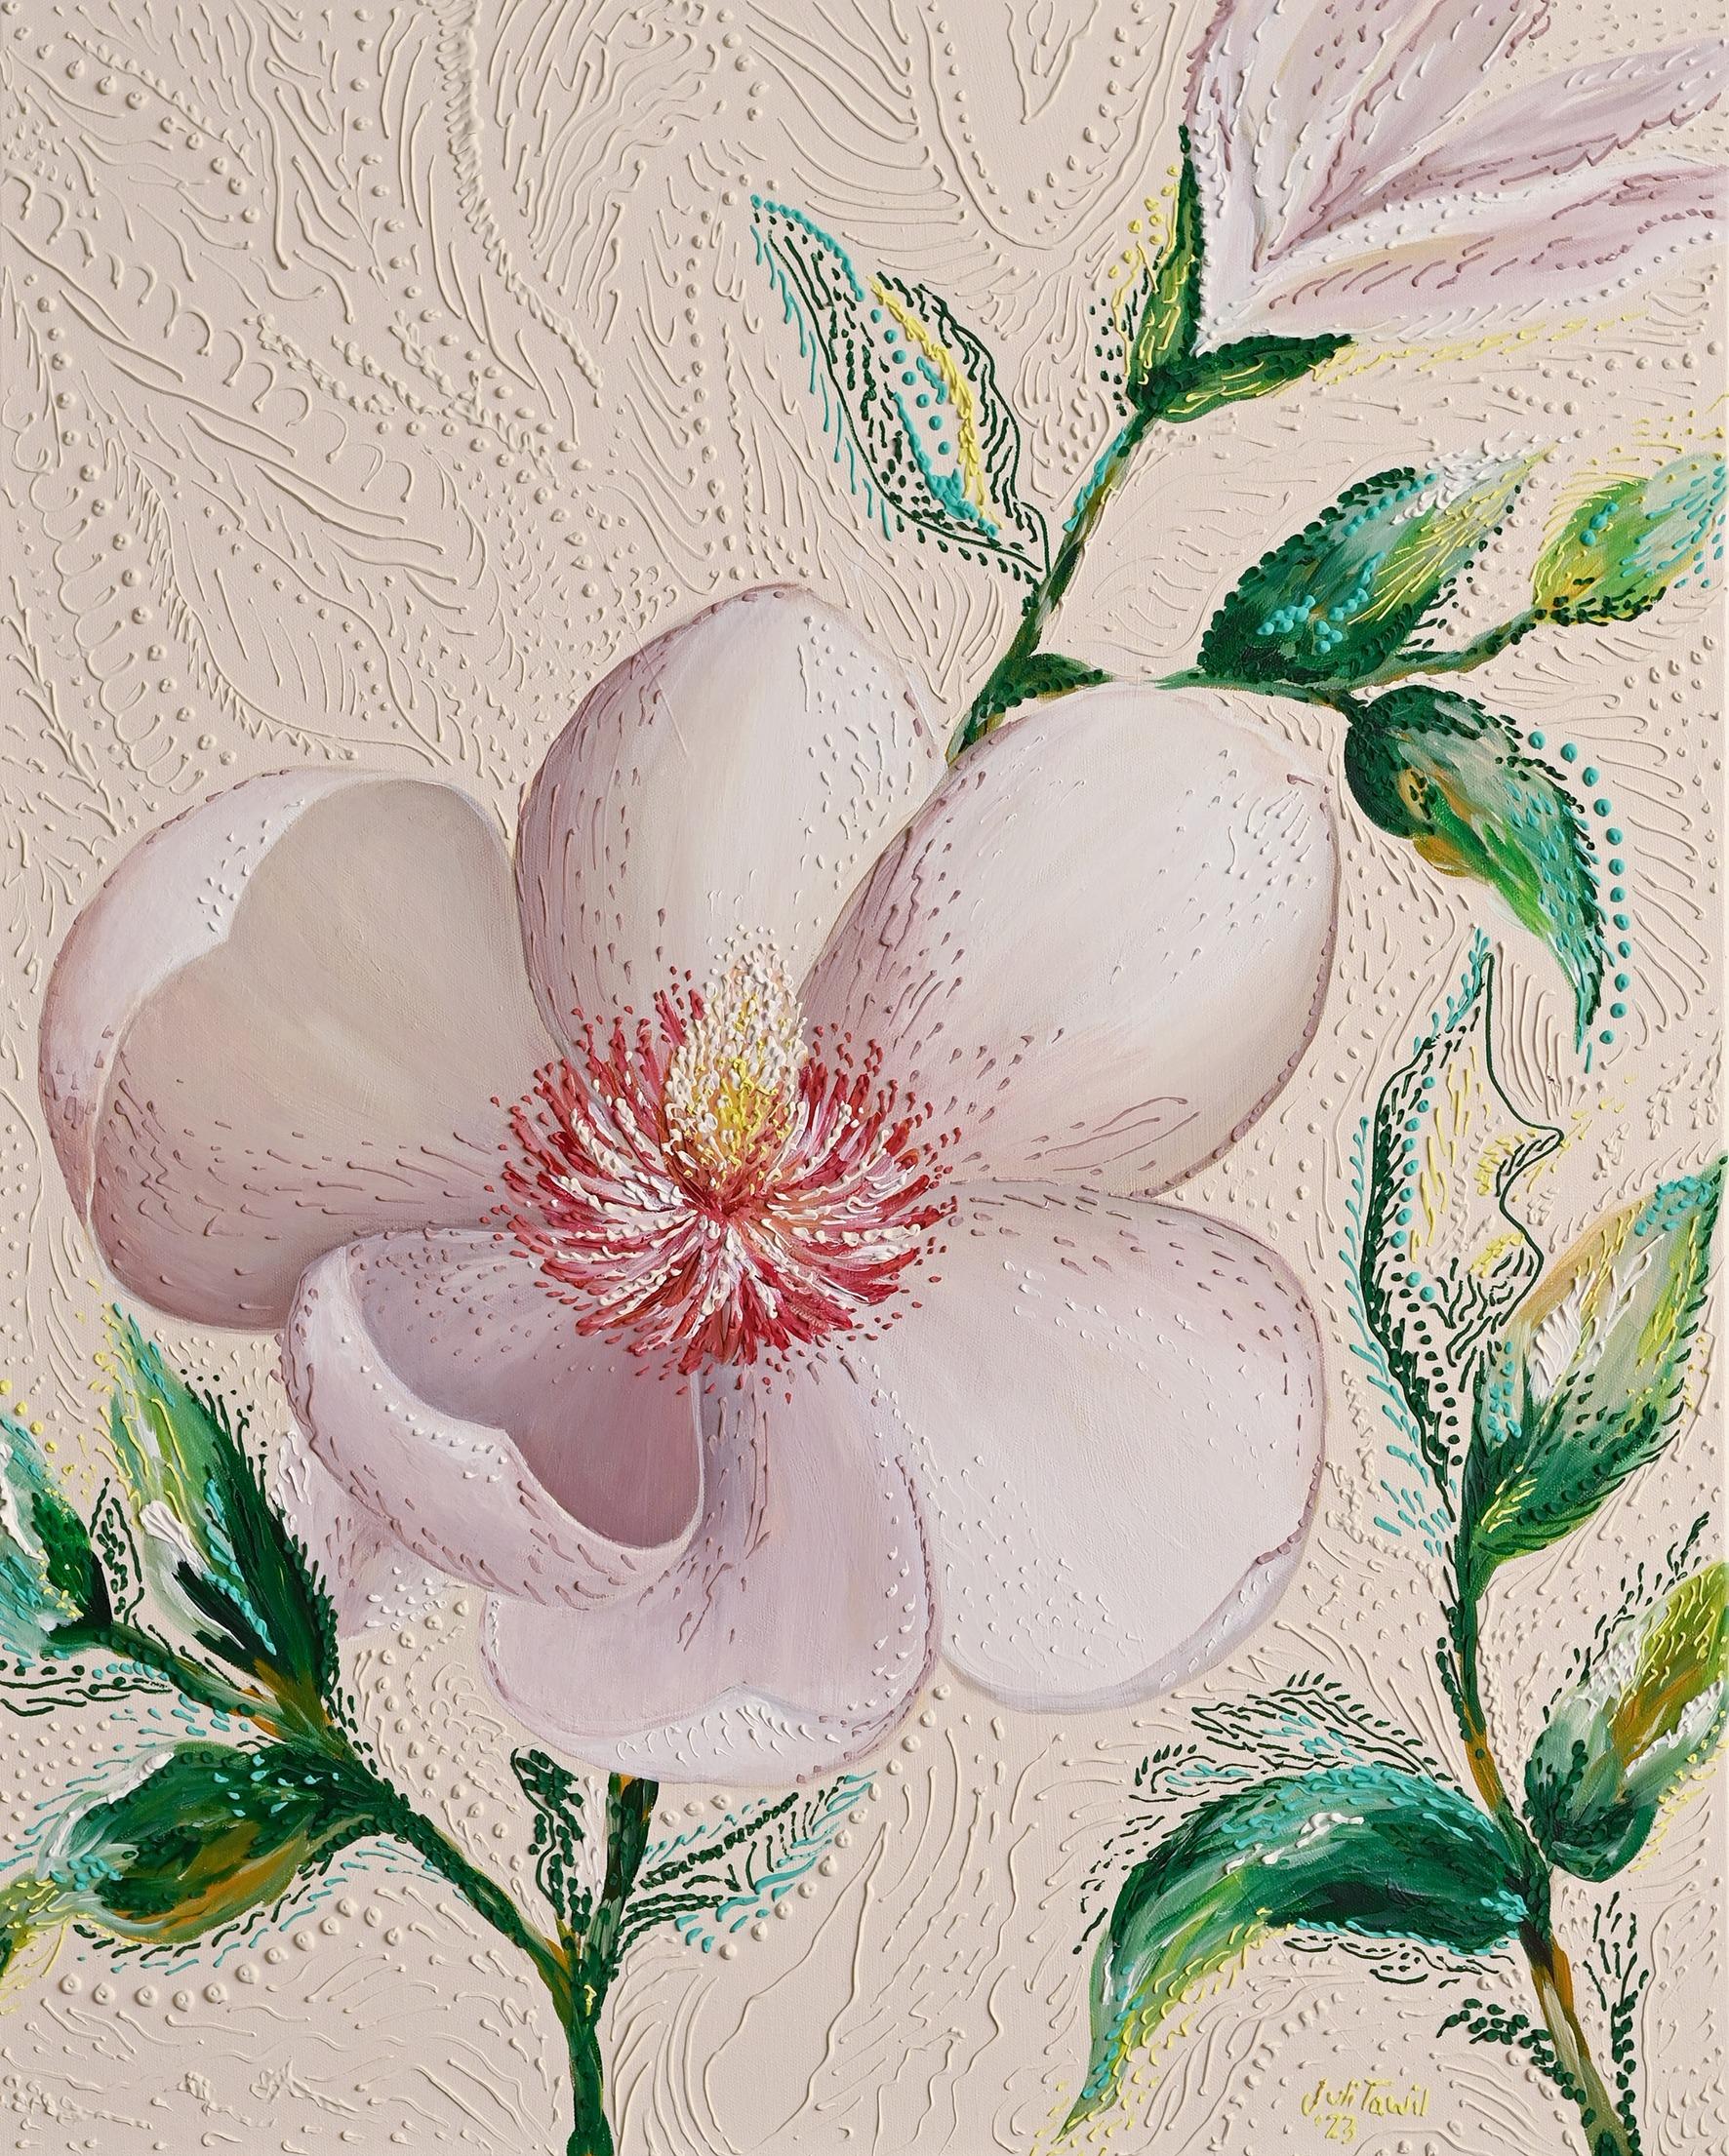 Magnolia by Julieta Tawil - Painting by Unknown